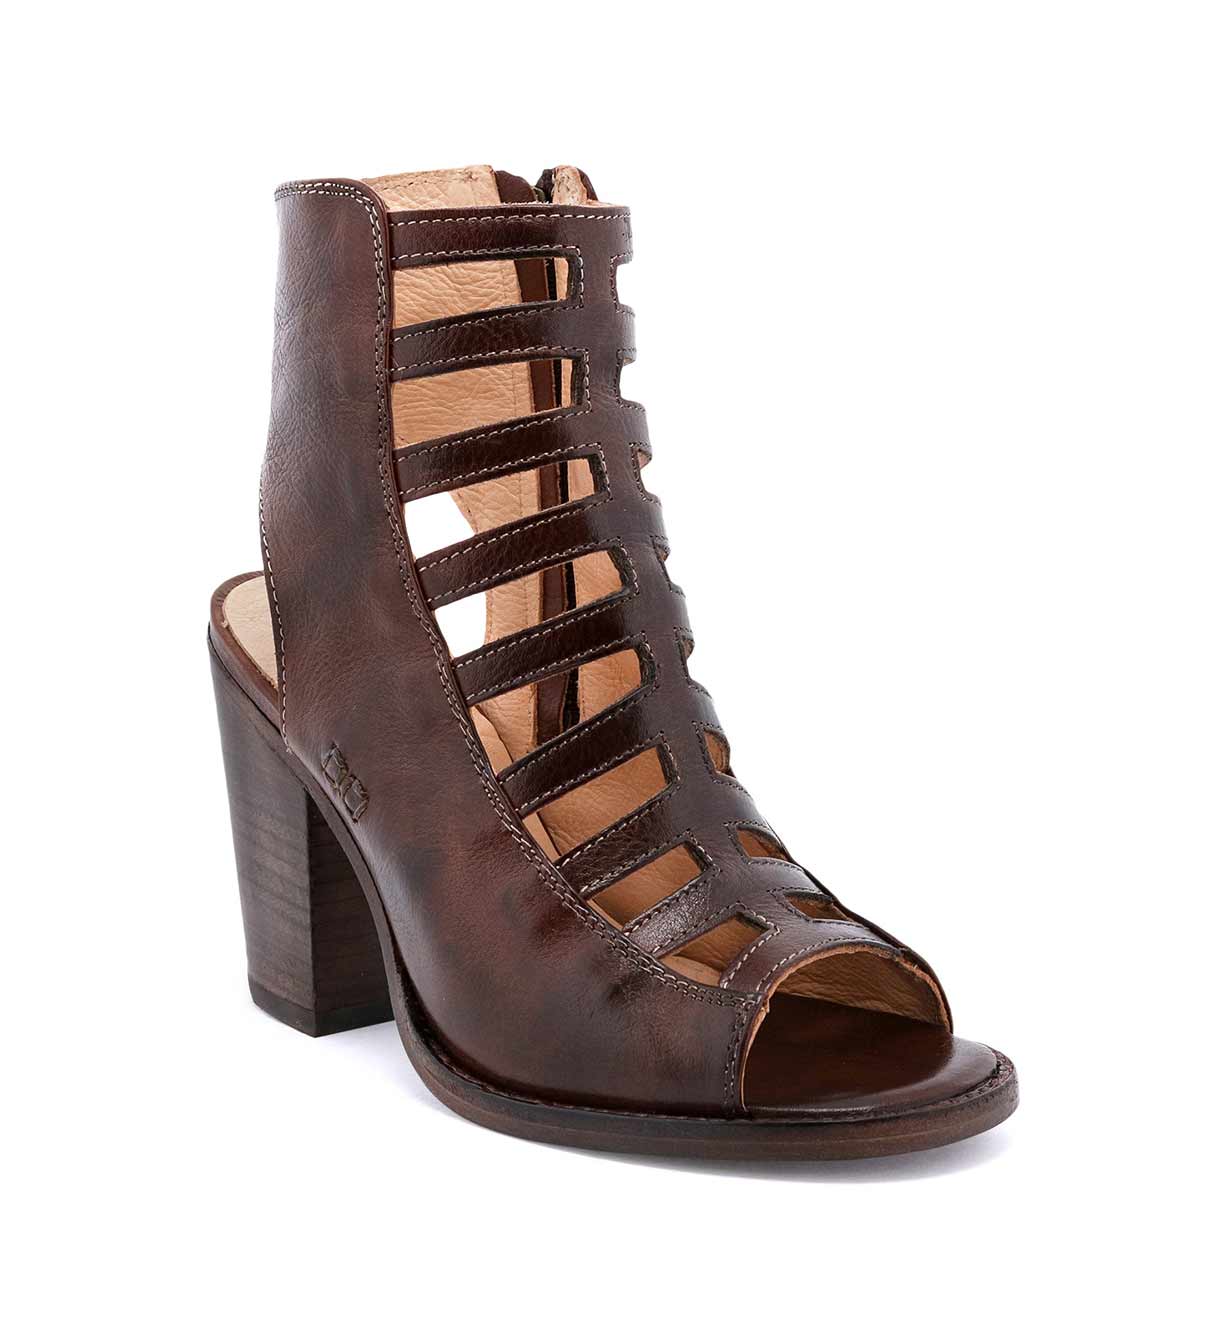 A women's brown high heeled sandal with a wooden heel, the Occam by Bed Stu.